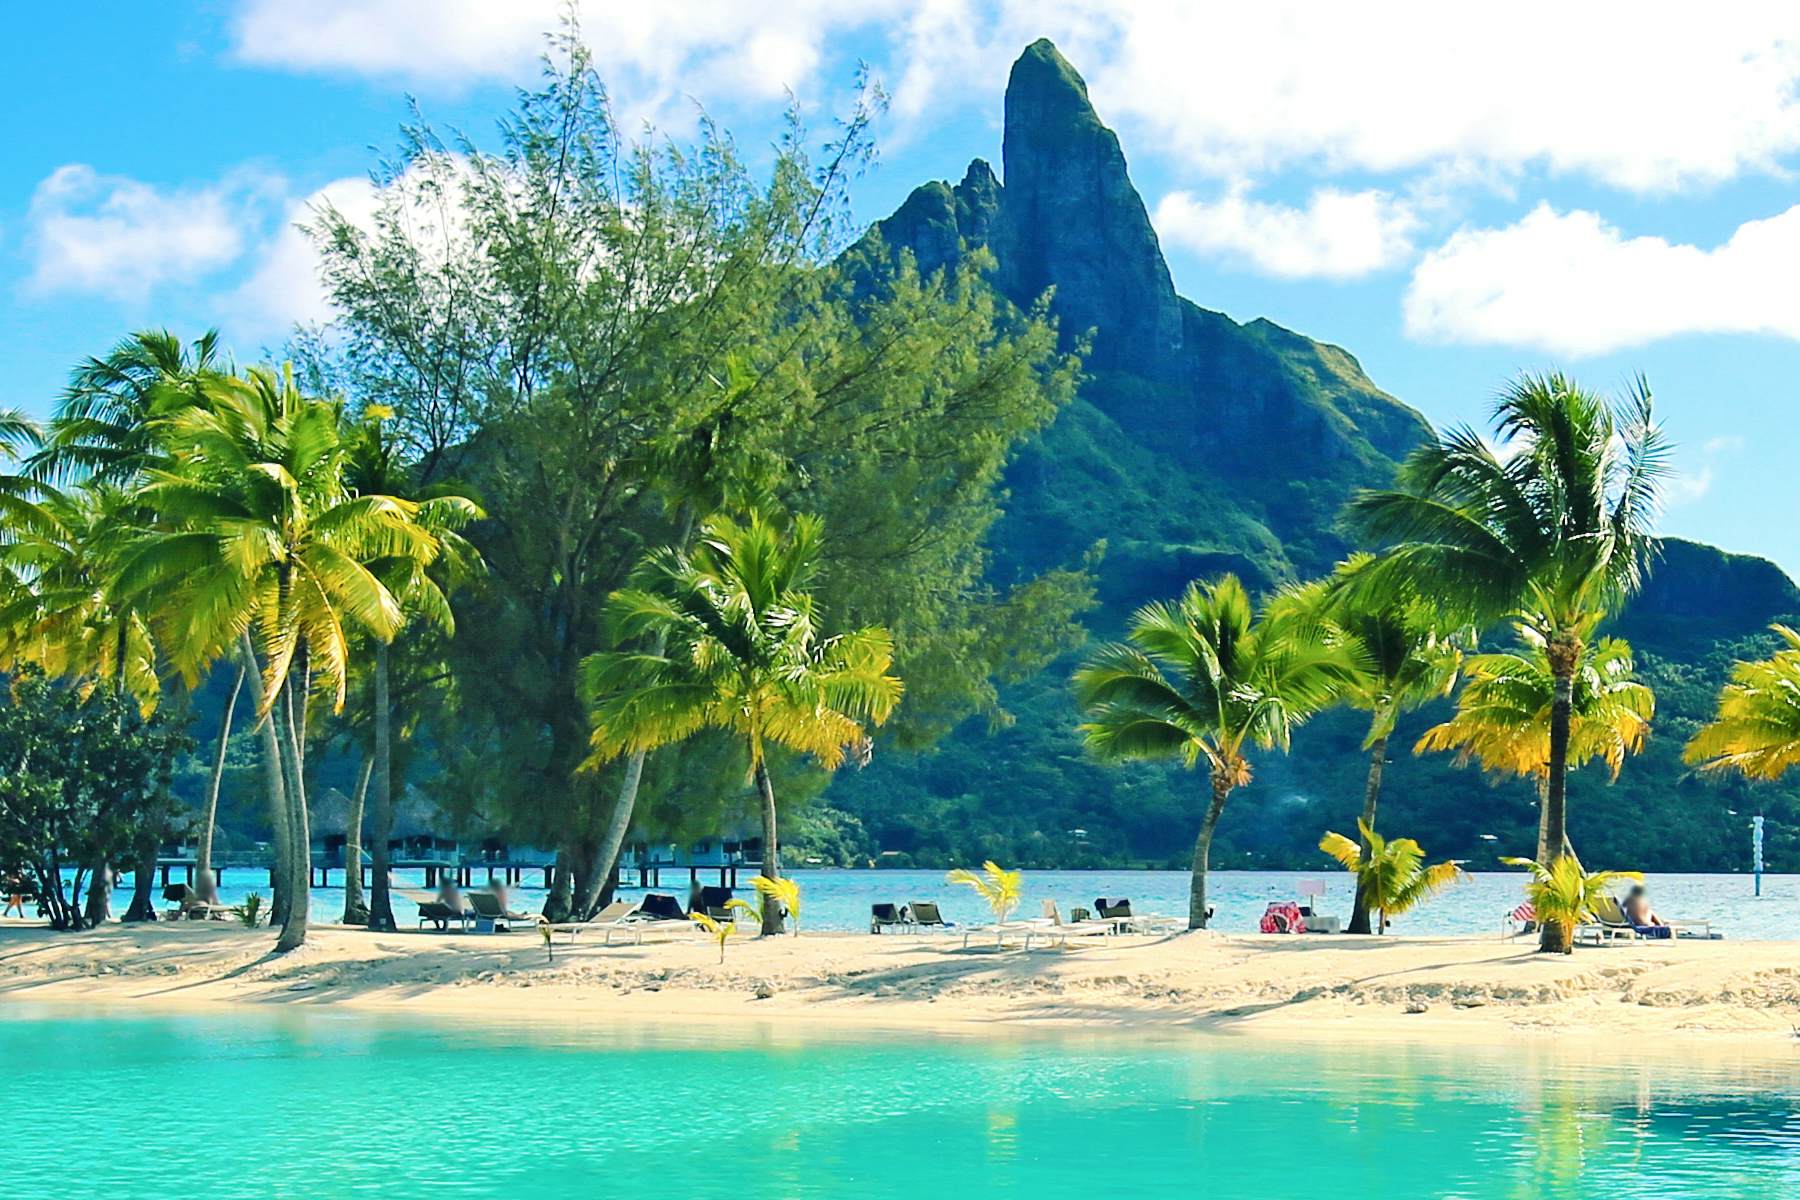 The 7 best hikes in Bora Bora - Lonely Planet